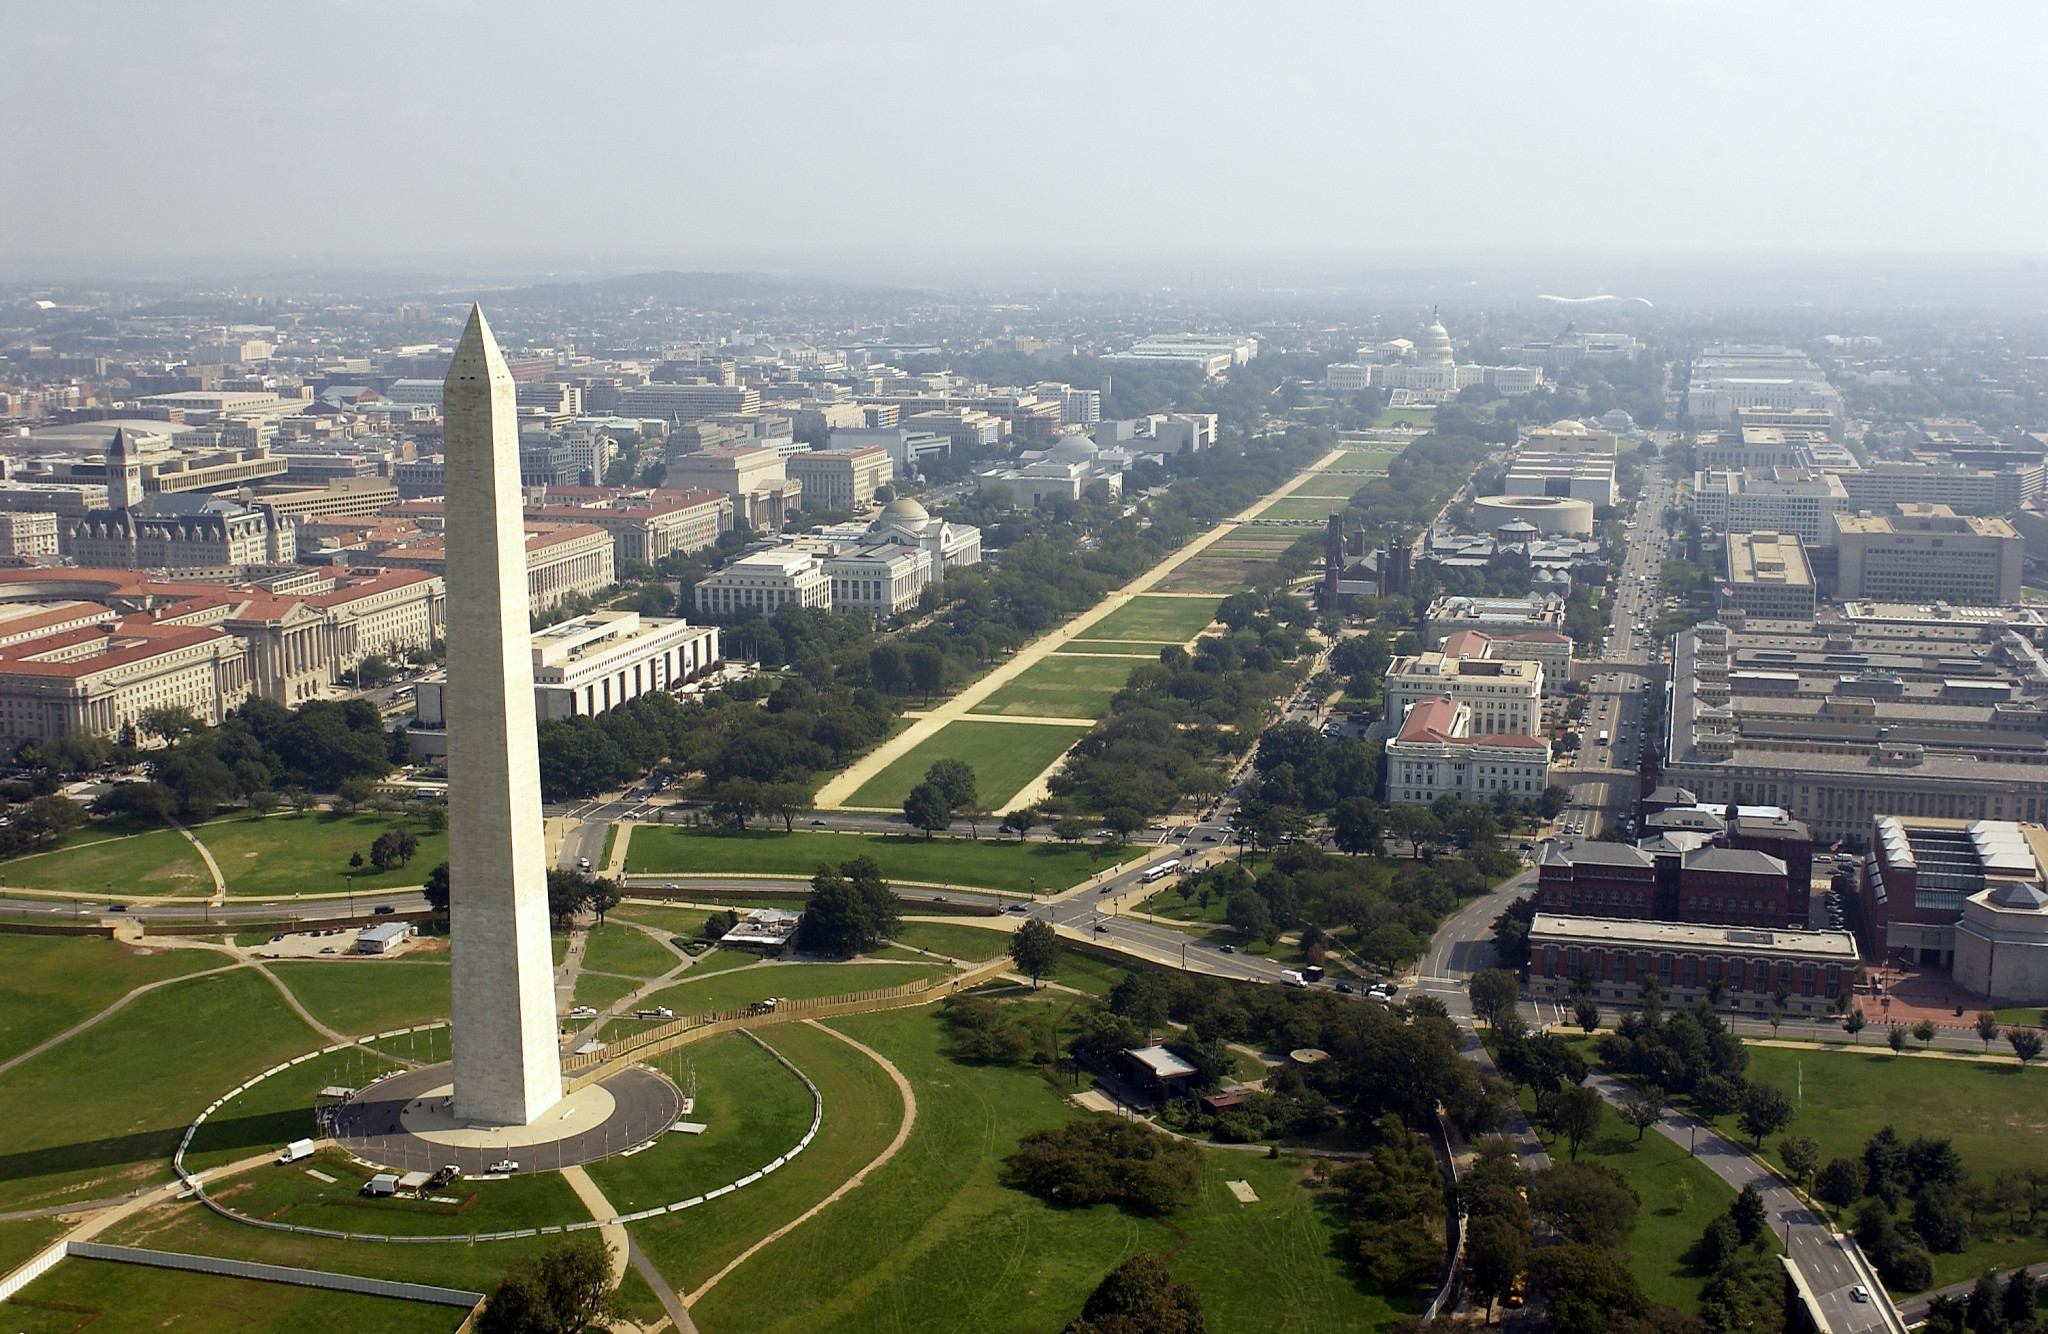 If successful, The National Mall in Washington DC will host the FIFA Fan Fest for the 2026 World Cup ©Getty Images